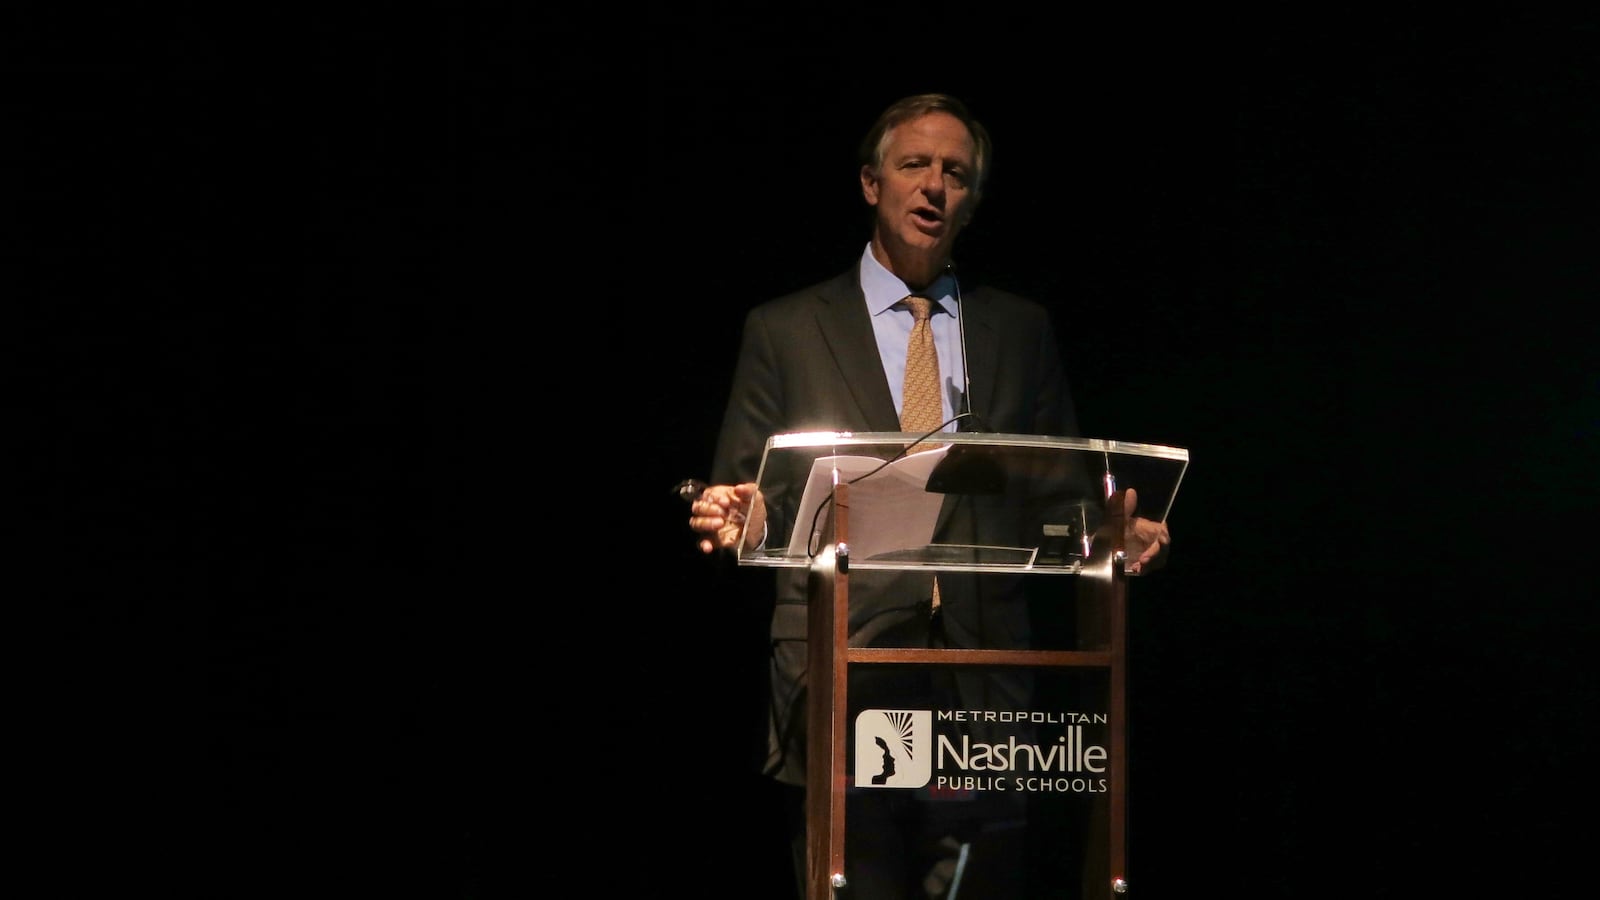 Gov. Bill Haslam has said he wants to be remembered as Tennessee's "education governor."